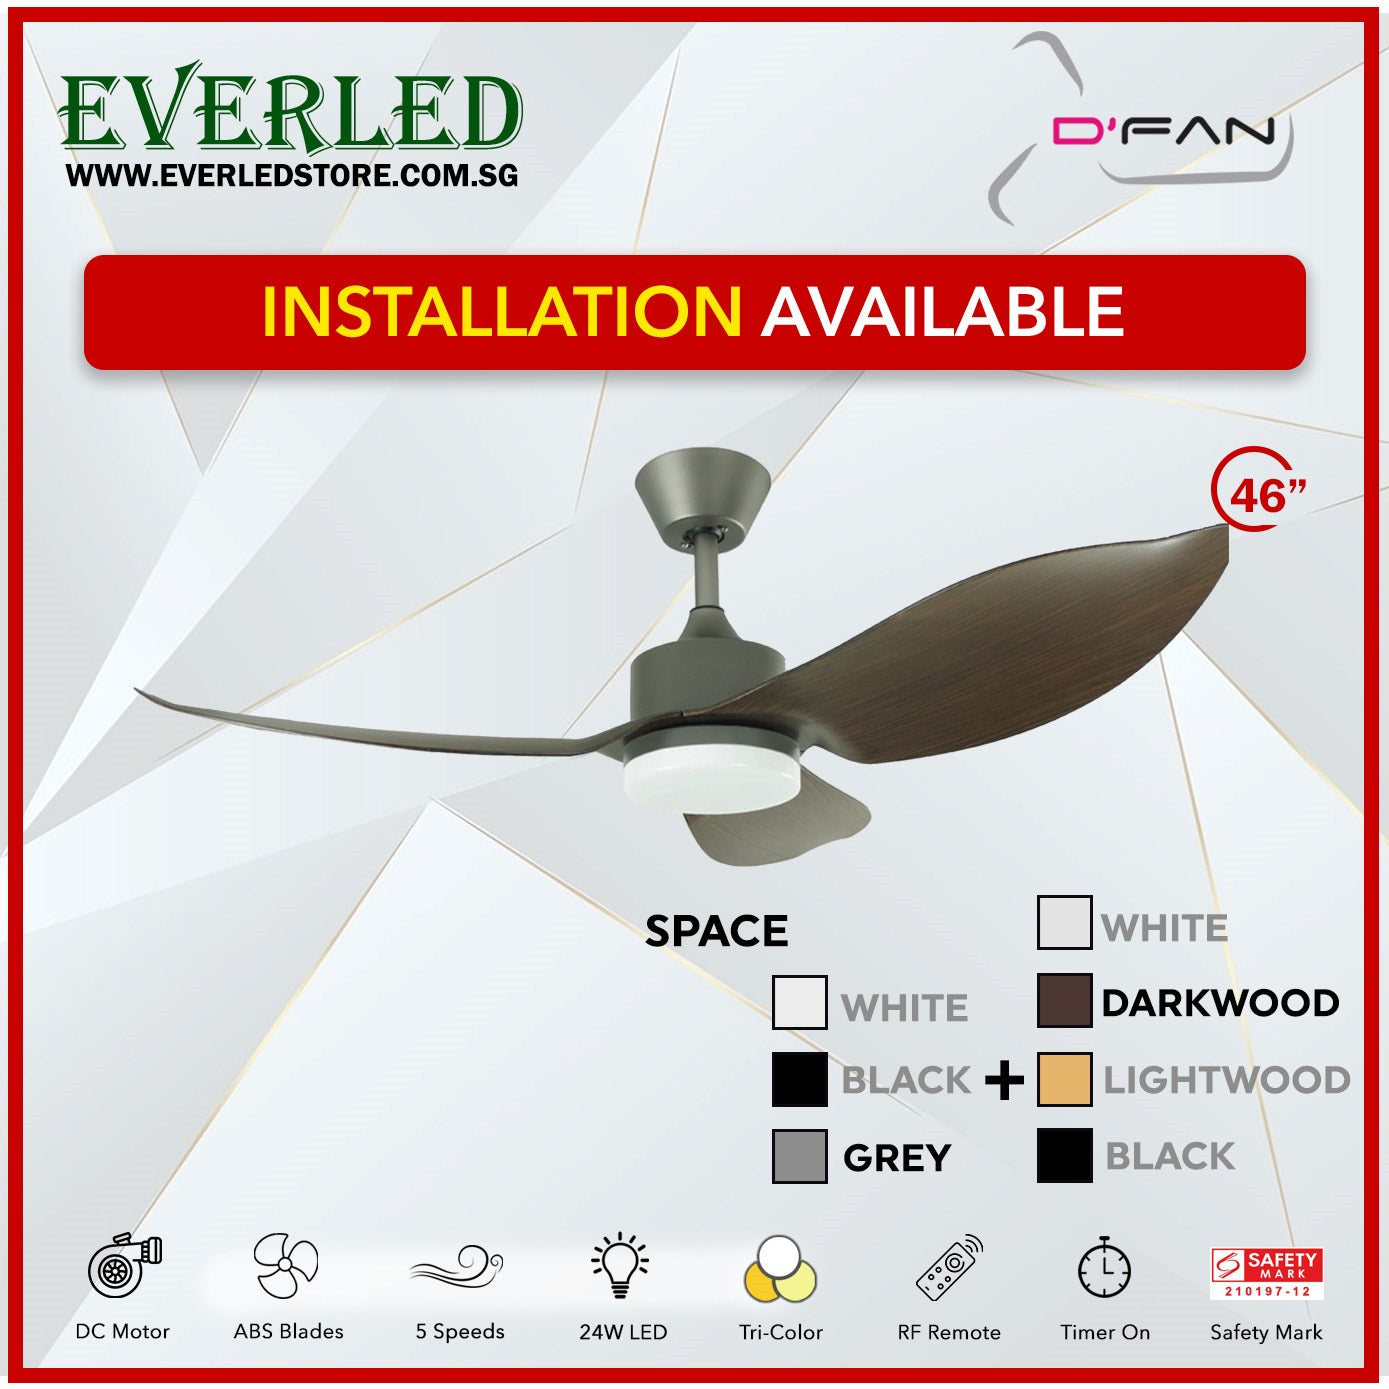 *FREE INSTALLATION* Mistral Dfan DC Space 46"  with Tri-color LED (Inverter DC Fan)